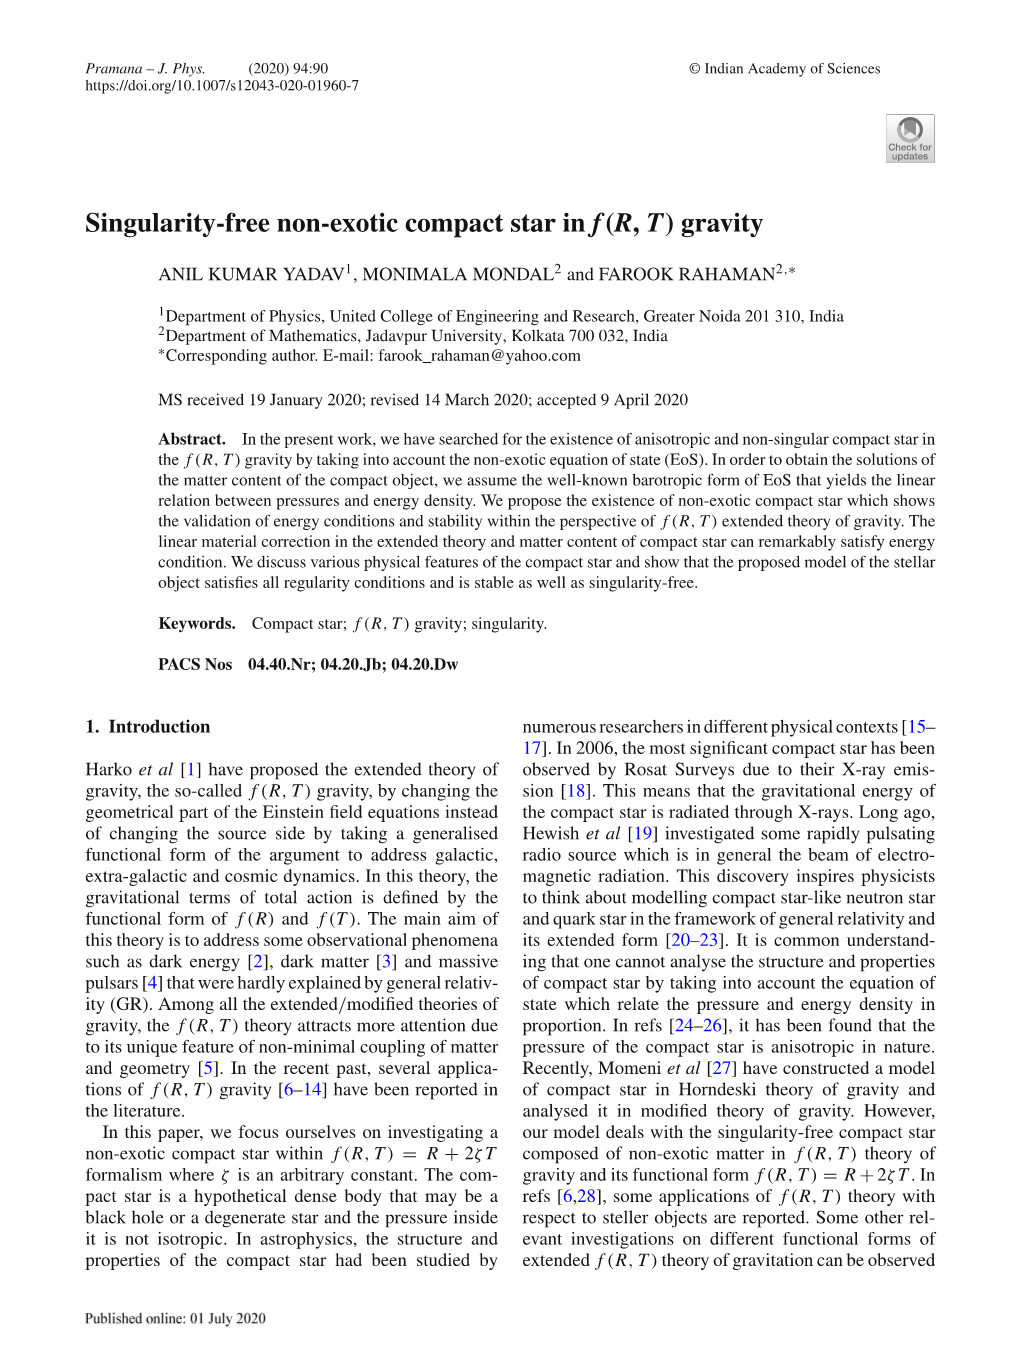 Singularity-Free Non-Exotic Compact Star in F(R, T)